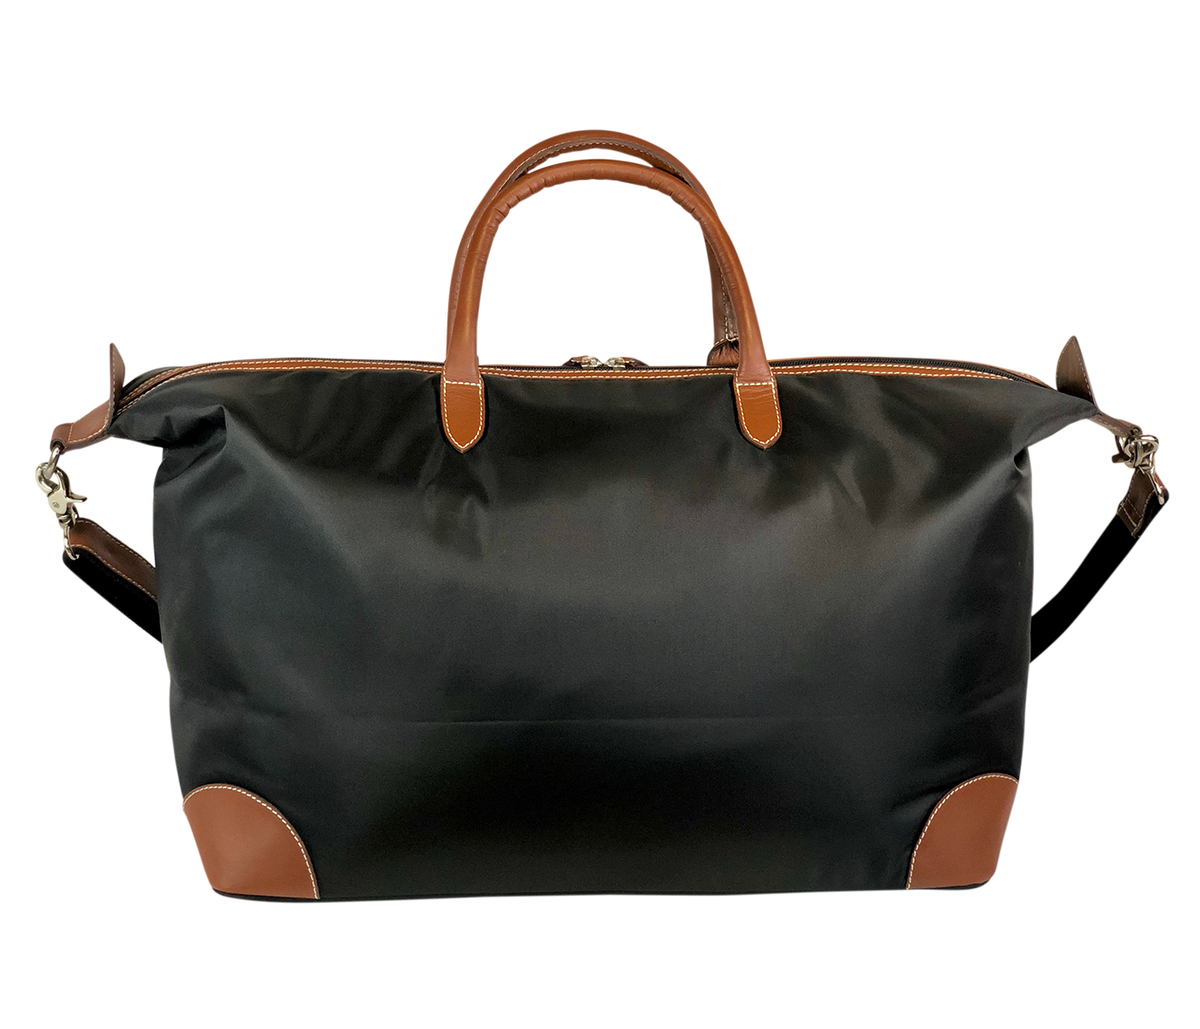 Tucker Tweed Leather Handbags The Tryon Travel Overnight: Foxhunting